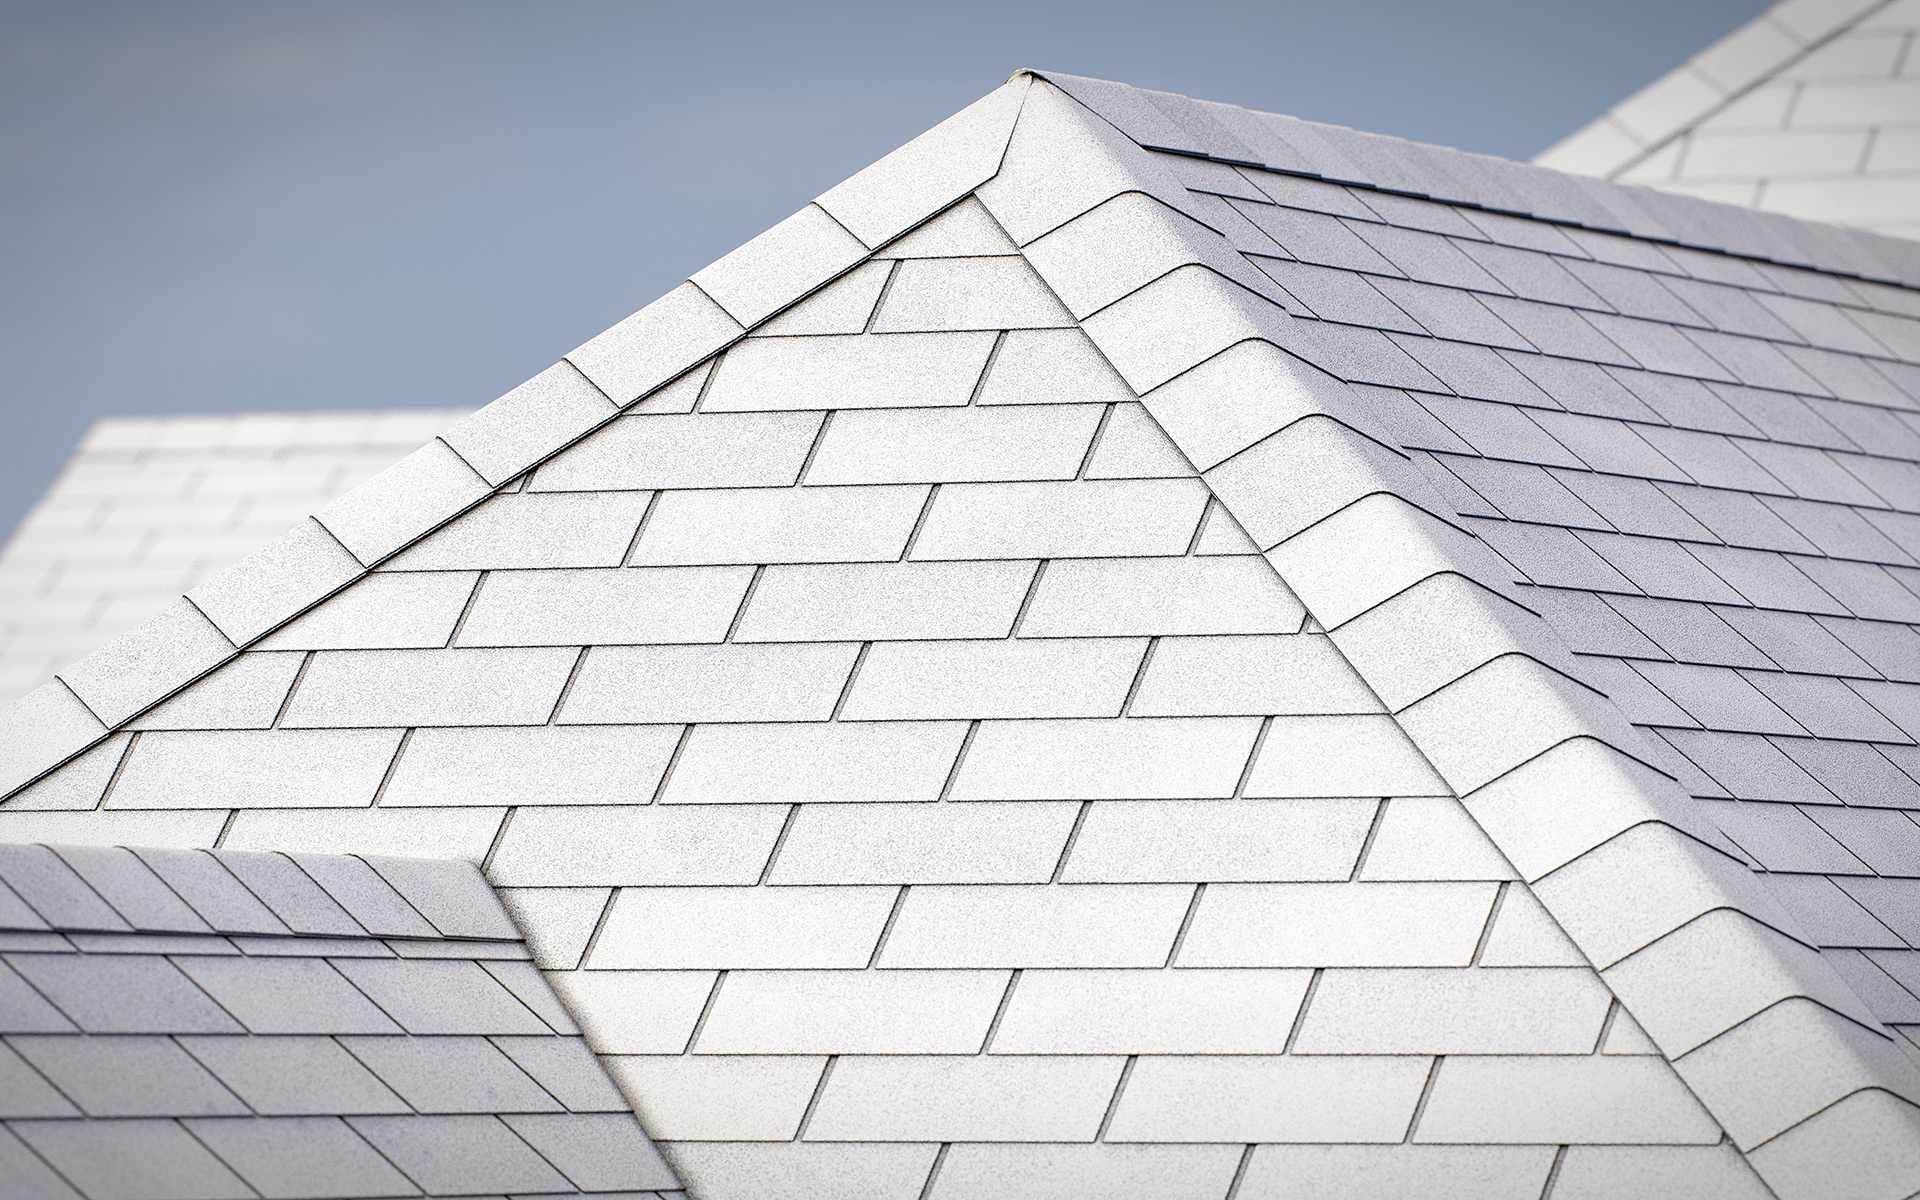 3-tab asphalt roof shingles white color 3D model preset for 3dsmax and RailClone. Rendered with vray, made for arch-viz.